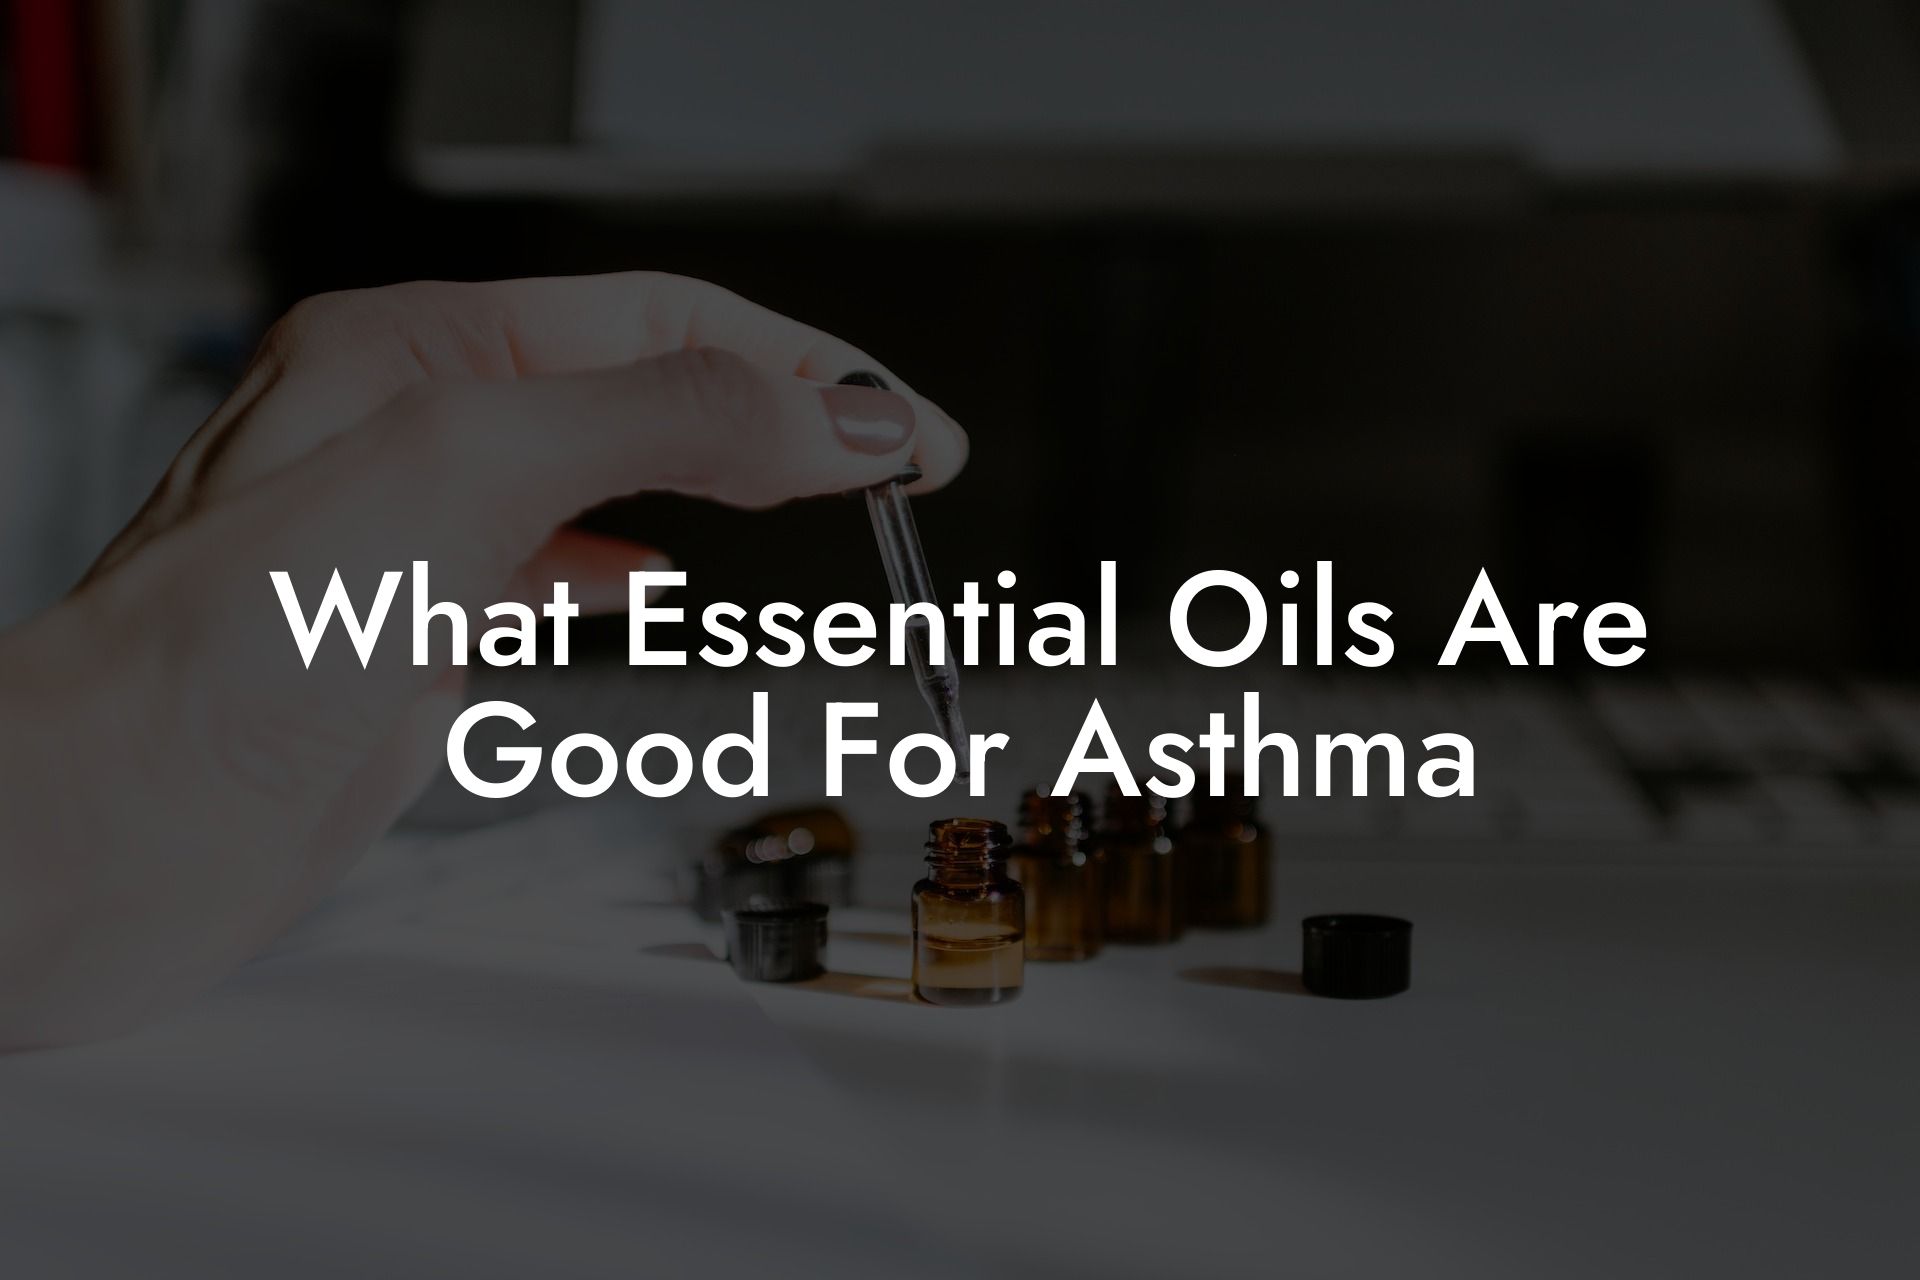 What Essential Oils Are Good For Asthma